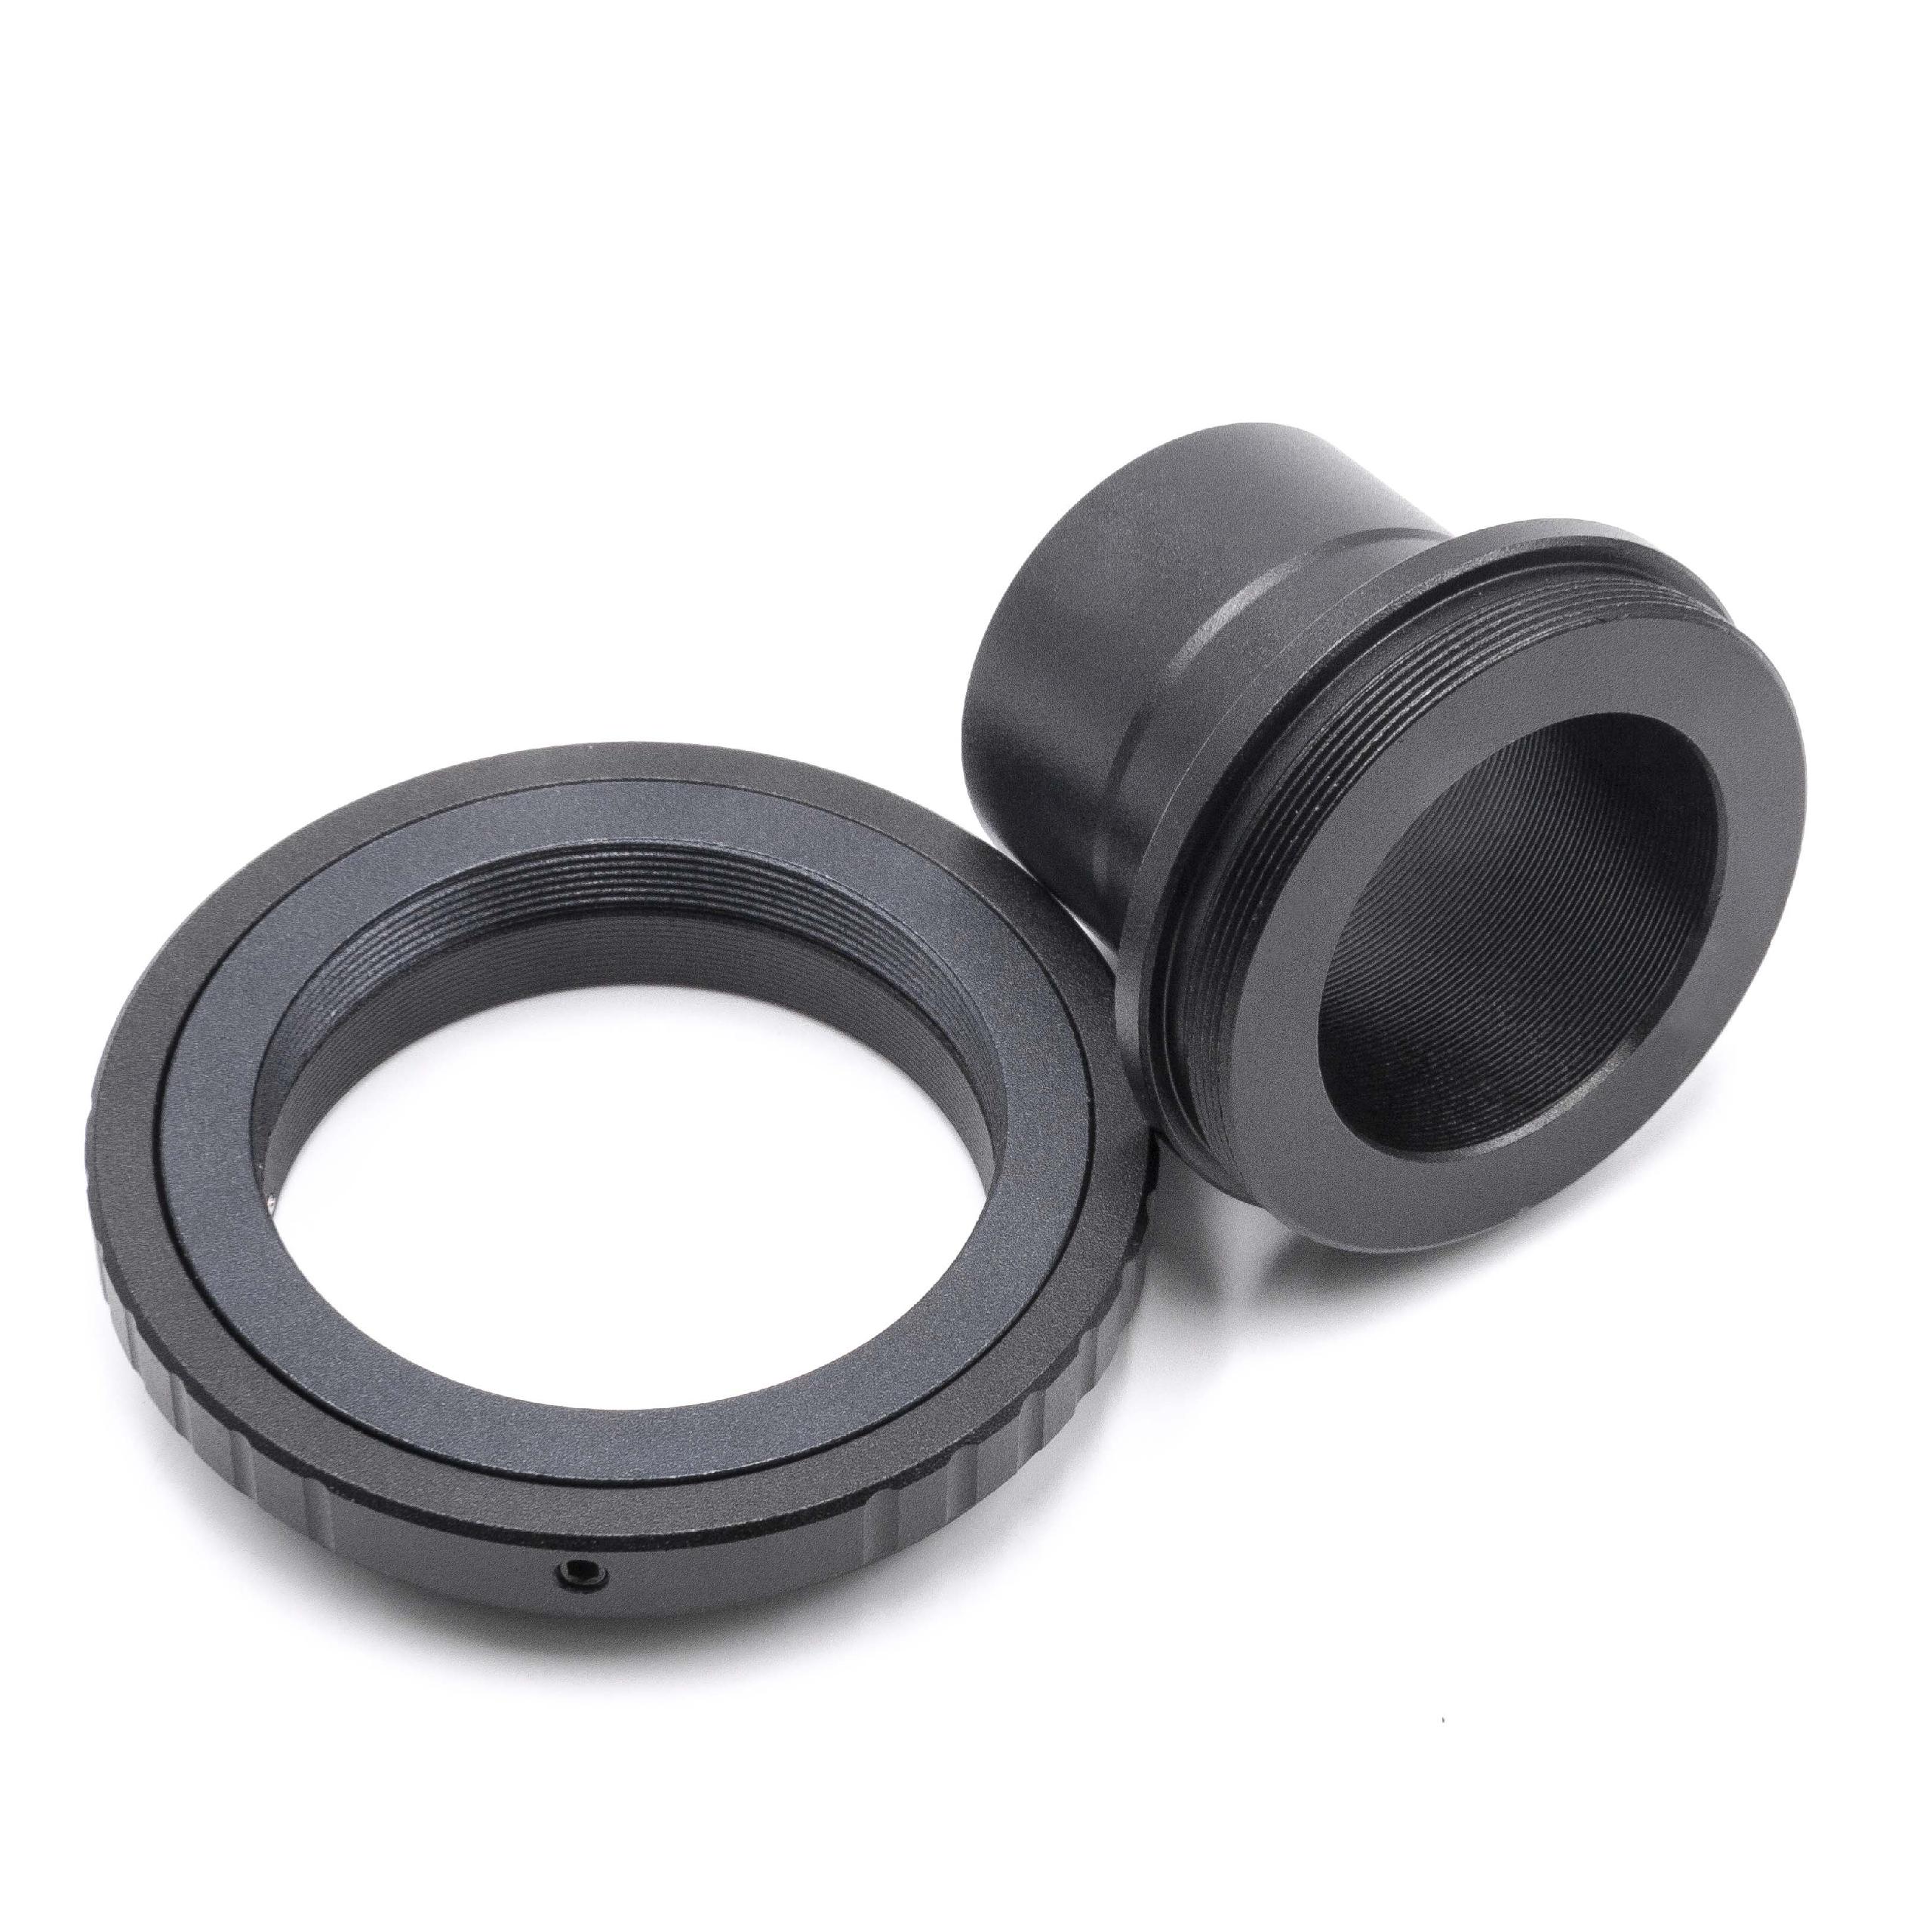 2x Adapter ring, T2-ring adapter, lens mount adapter 1,25" - M42 x 075" suitable for Nikon D50 telescope, came